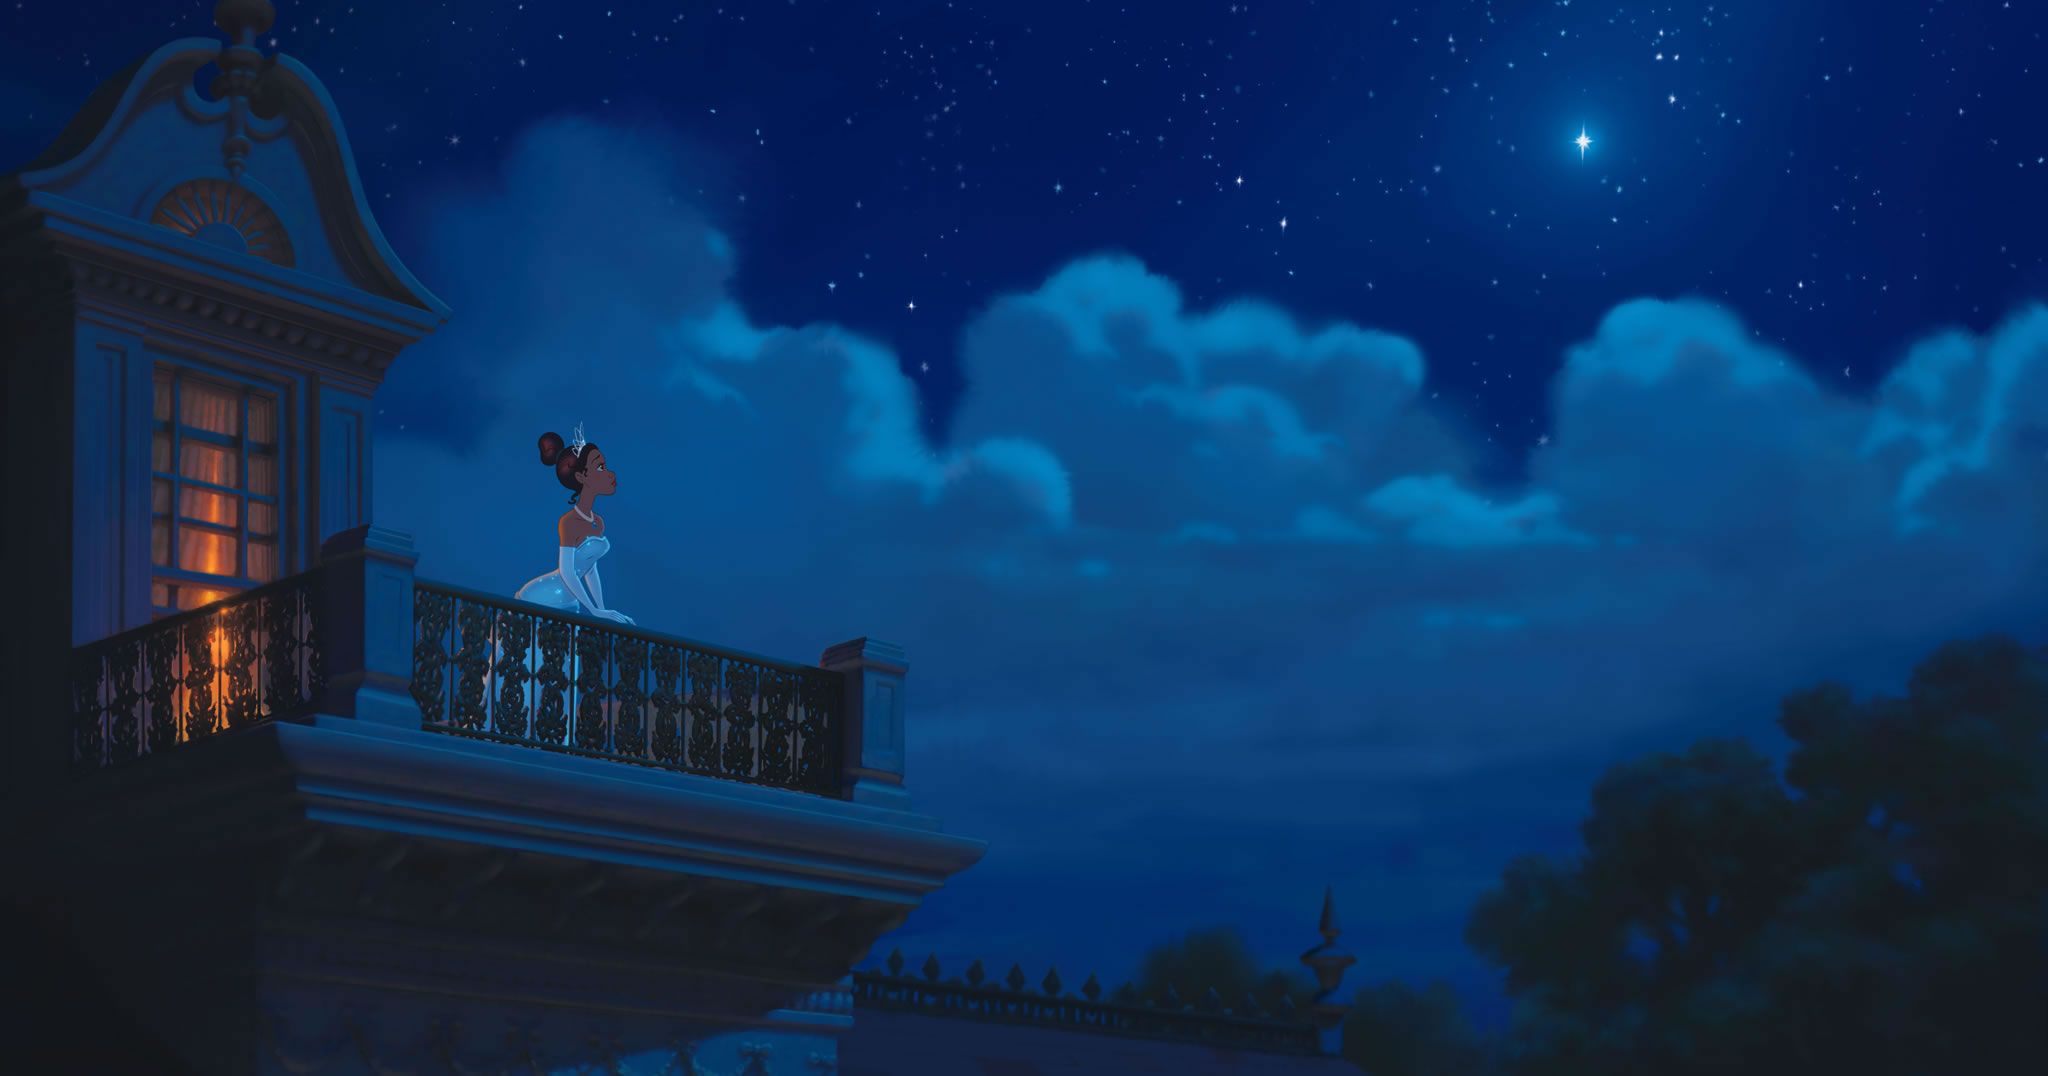 If you wish upon a star..